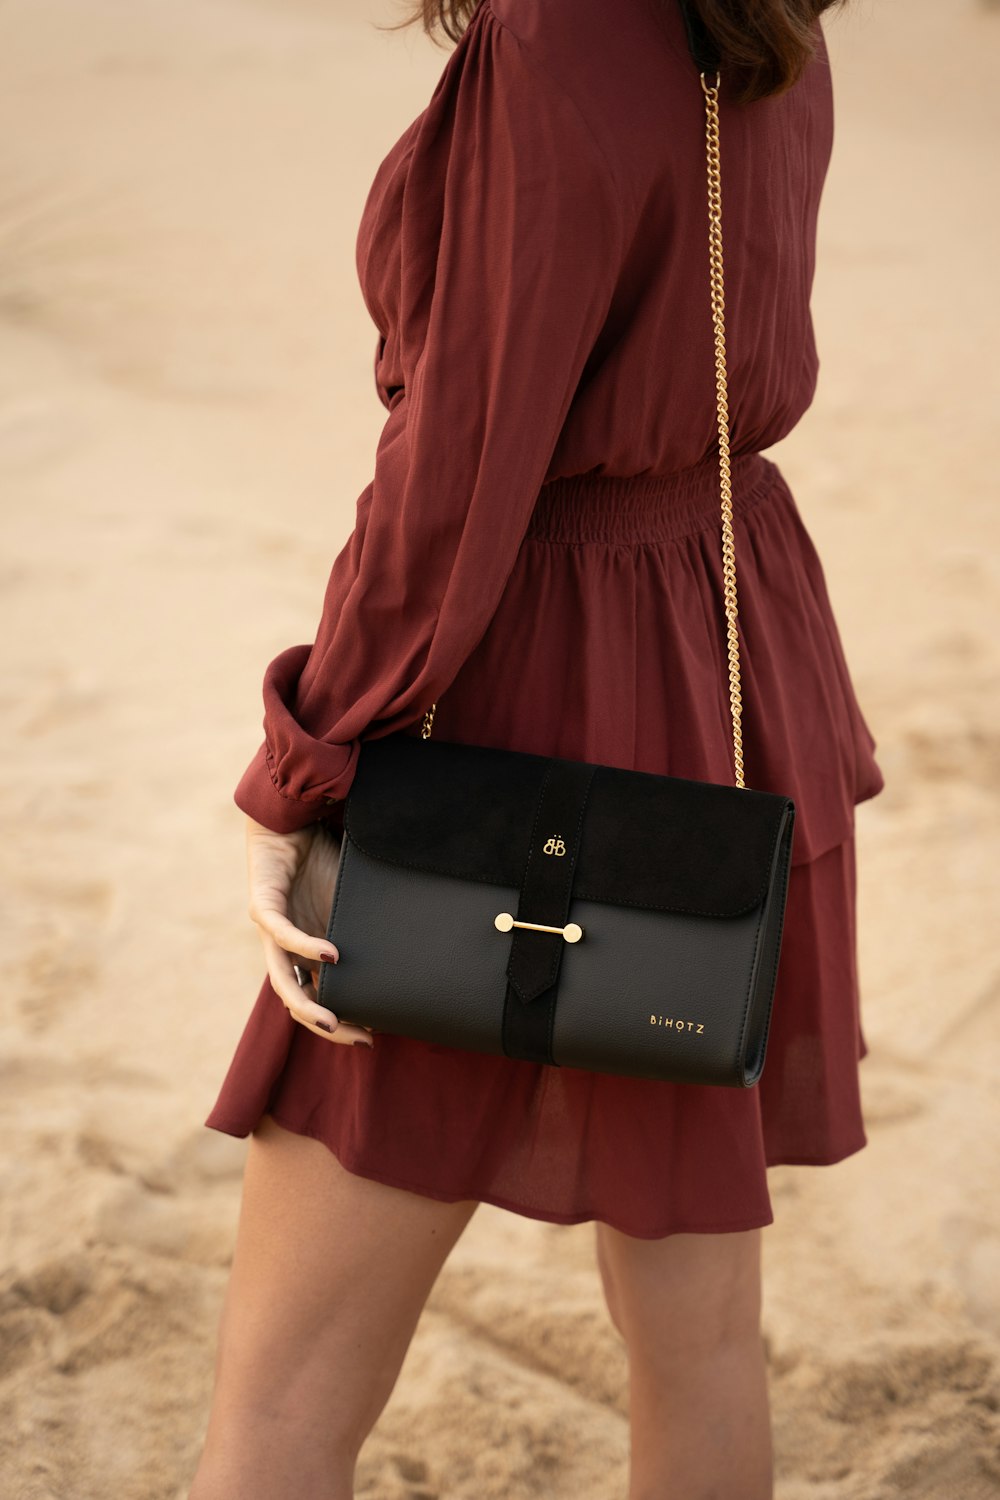 woman in red long sleeve shirt and black skirt carrying black leather handbag